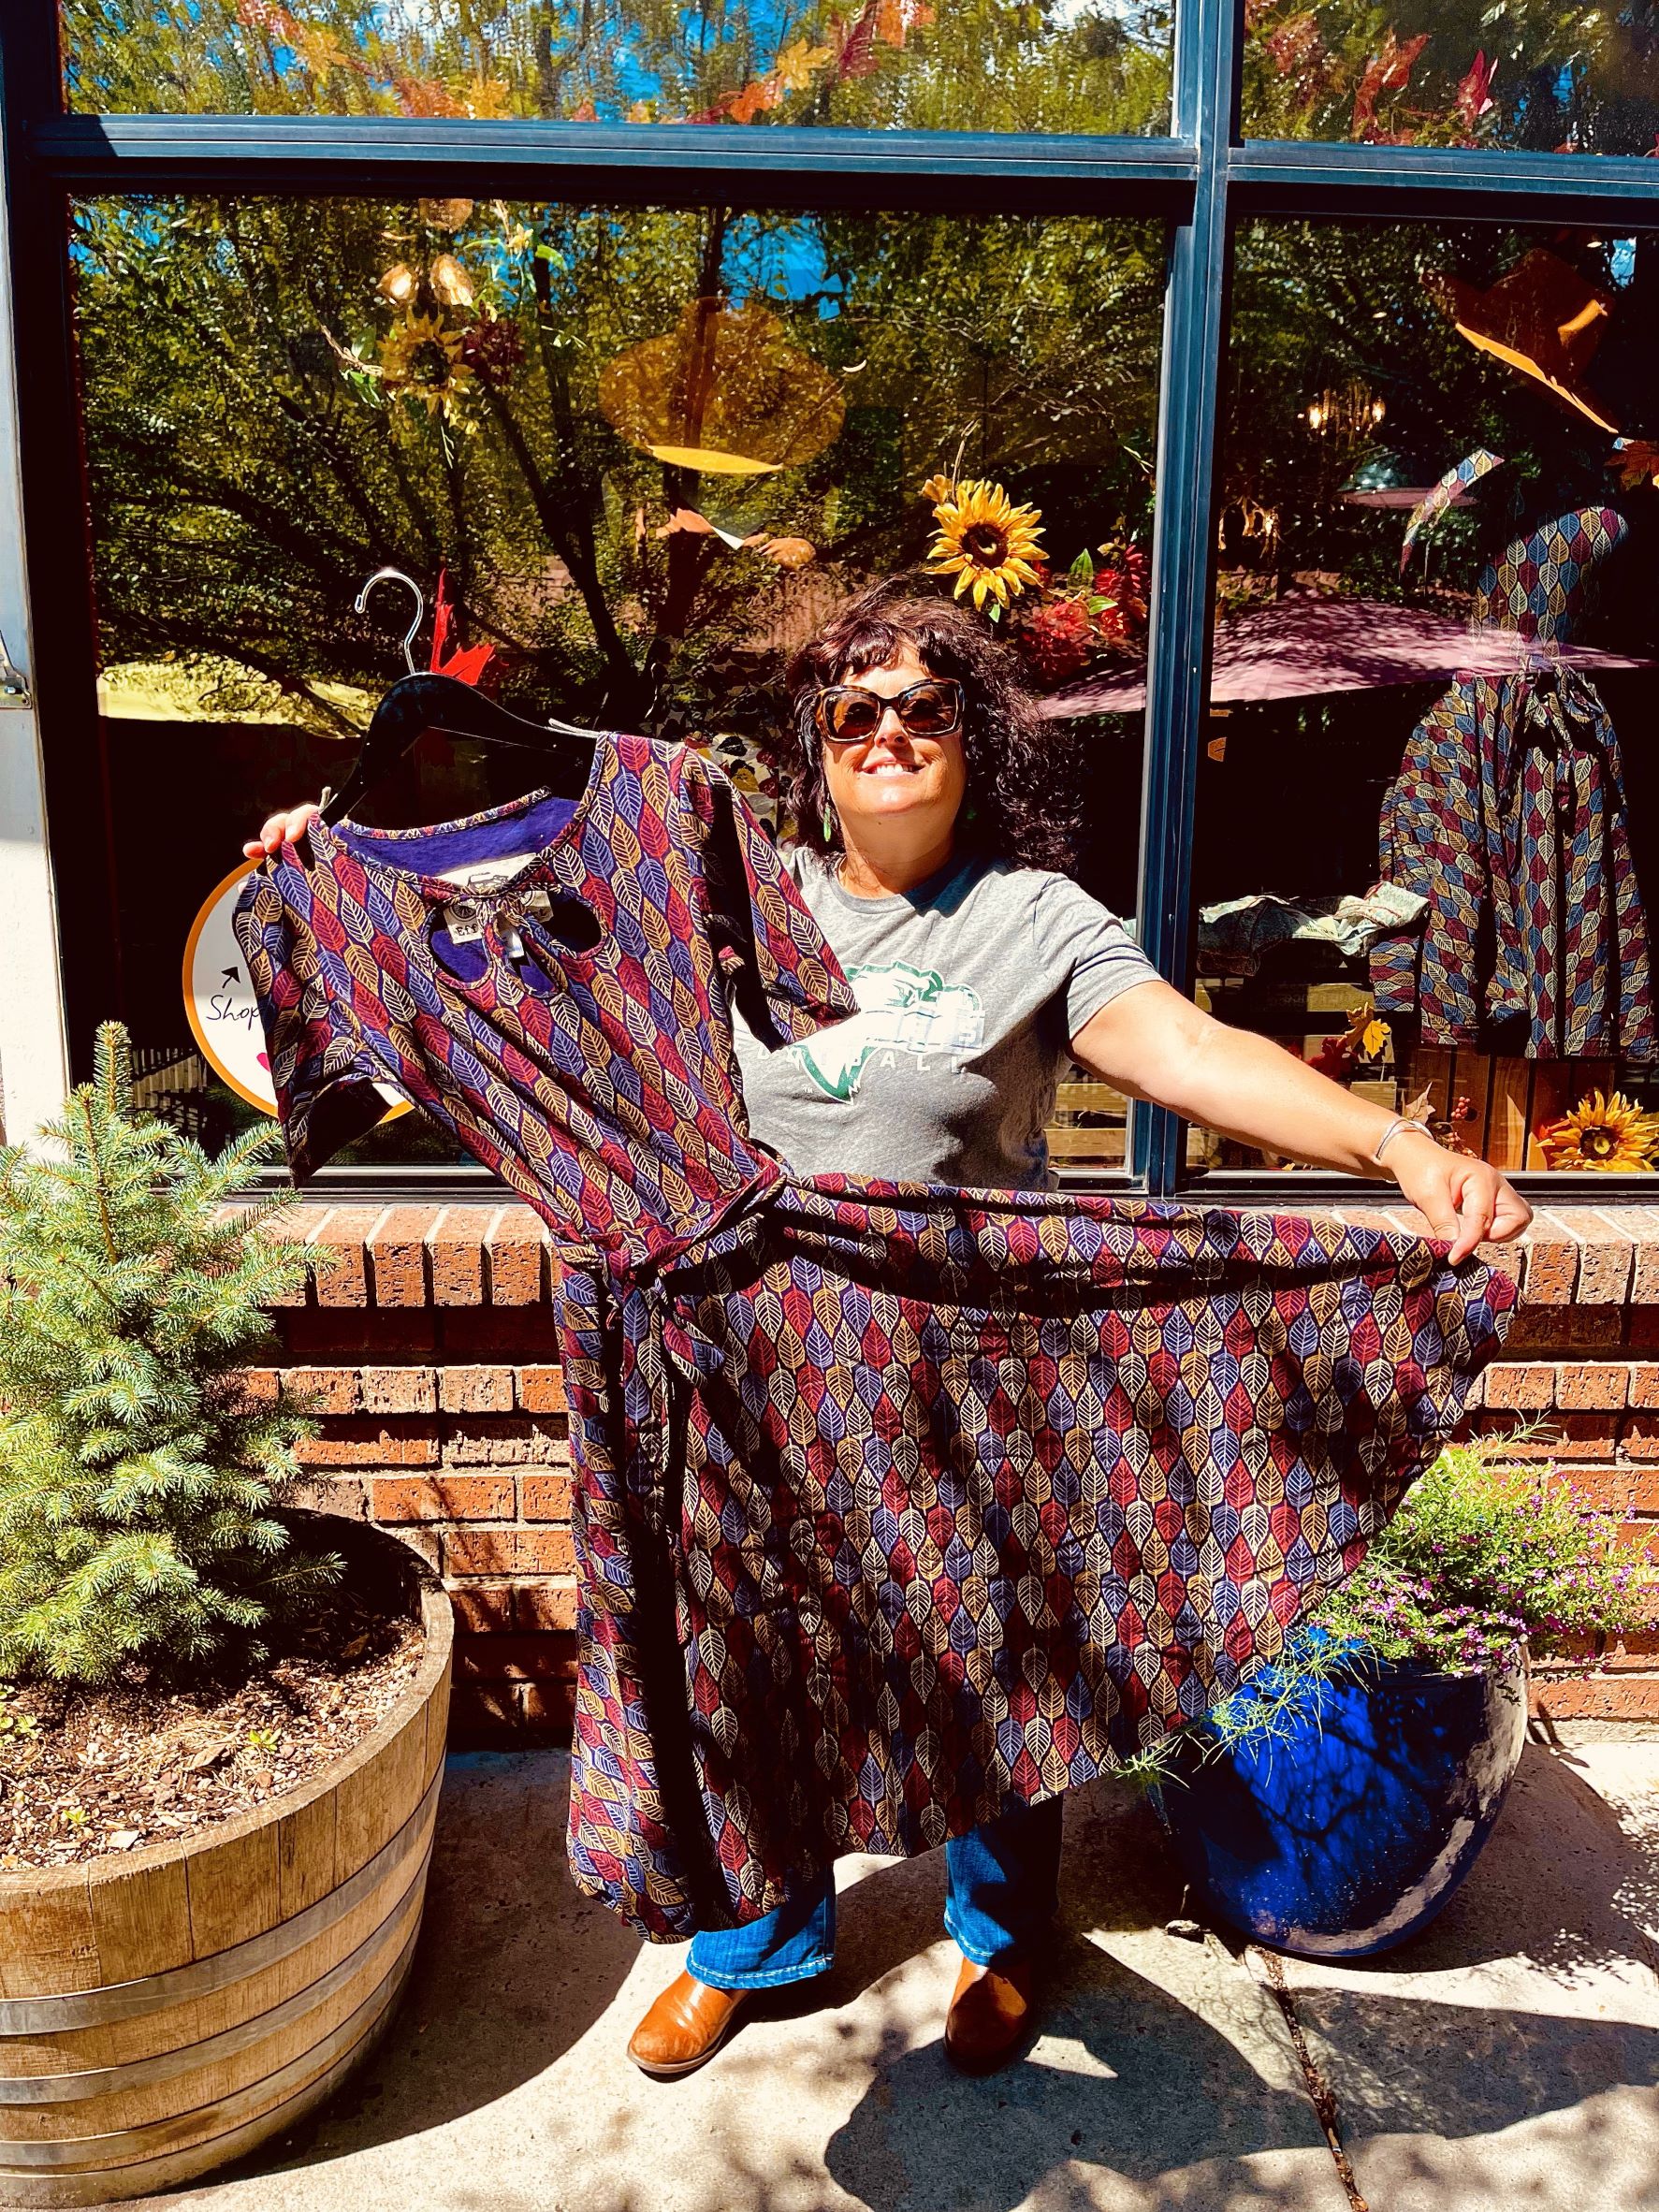 Miranda Sweet, owner of Rainbow’s End Boutique in downtown Flagstaff, holding a dress in front of her.